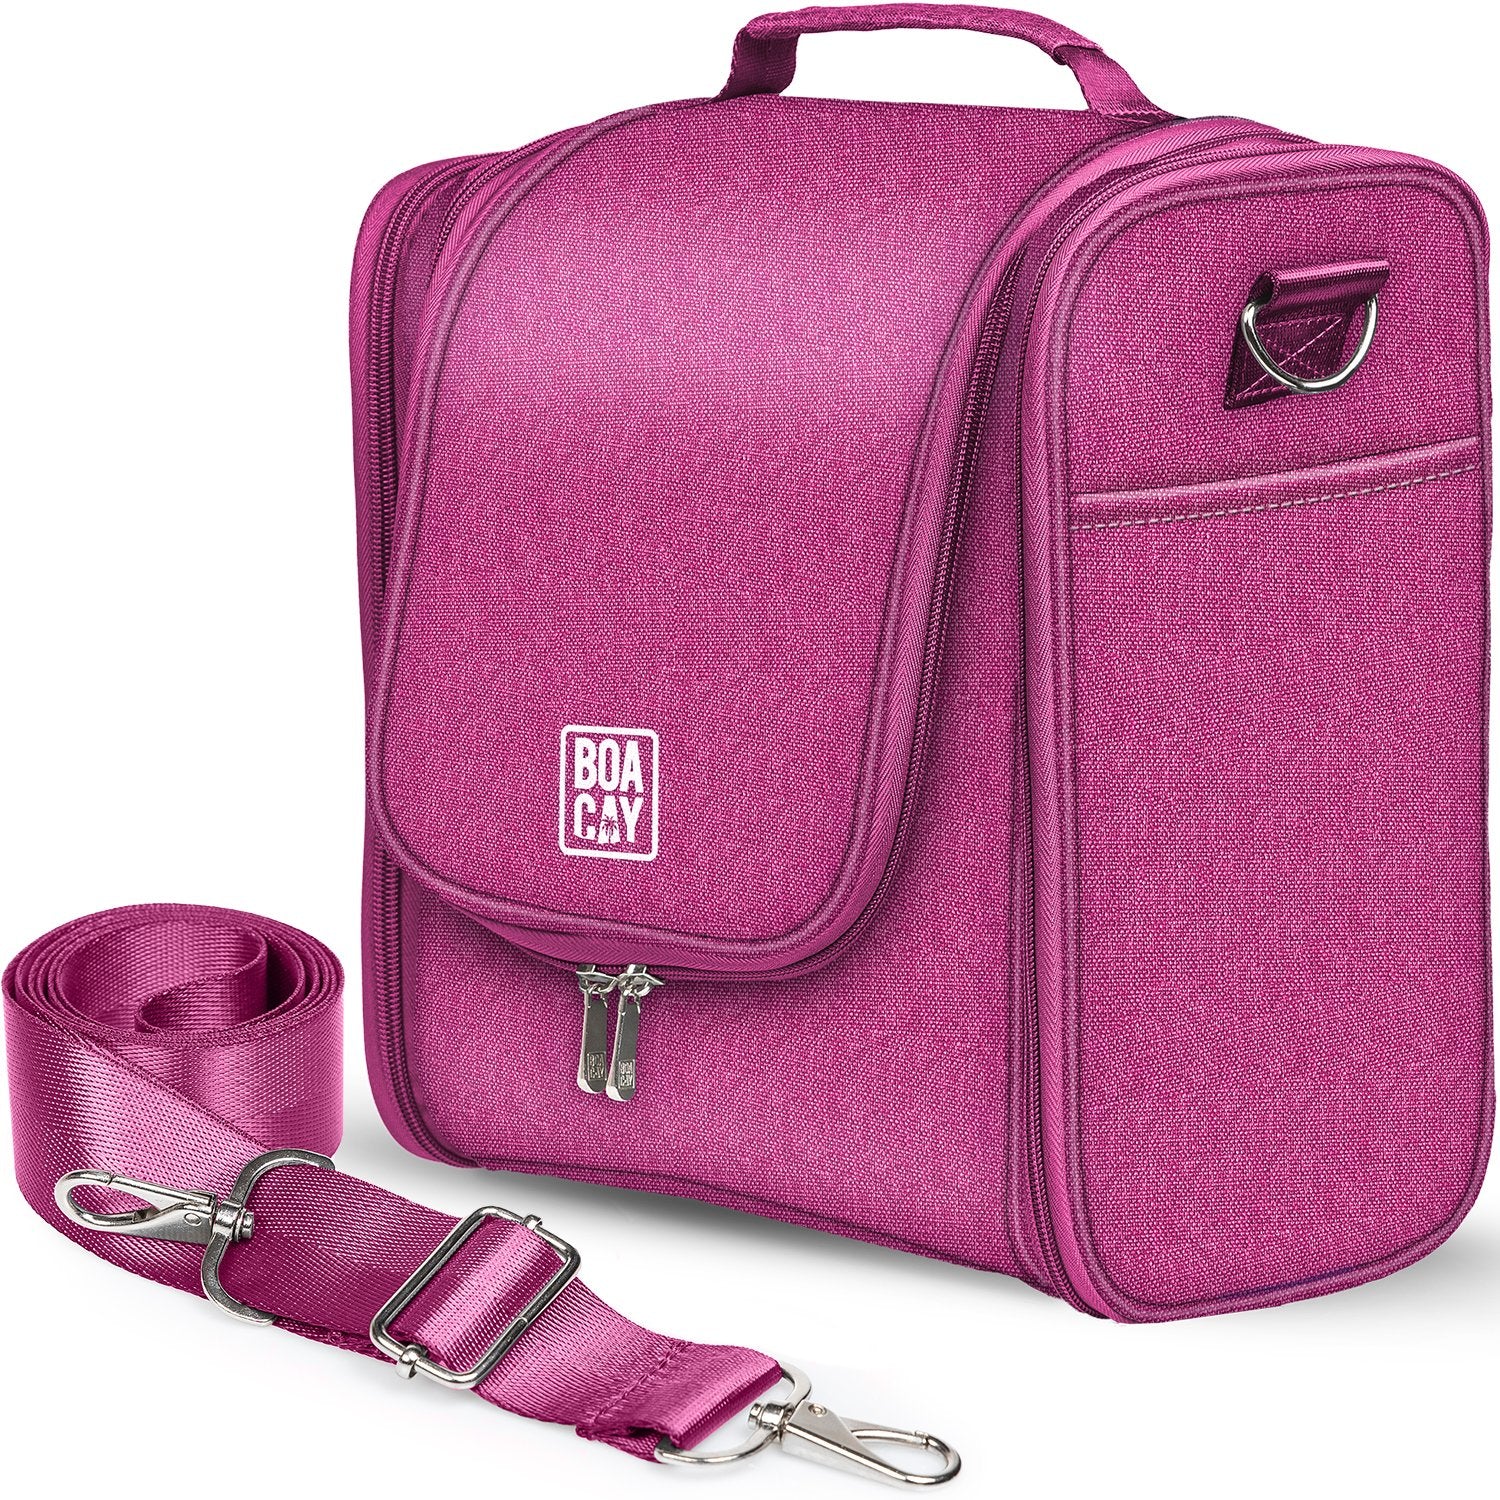 Pink extra-large toiletry bag, Travel Toiletry Bags, toiletry travel bag, Toiletry Bags, best travel toiletry bag, hanging travel toiletry bag, travel bag for toiletries, travel toiletry bags, toiletries travel bag, mens travel toiletry bag, mens toiletry travel bag, travel toiletry bag for men 